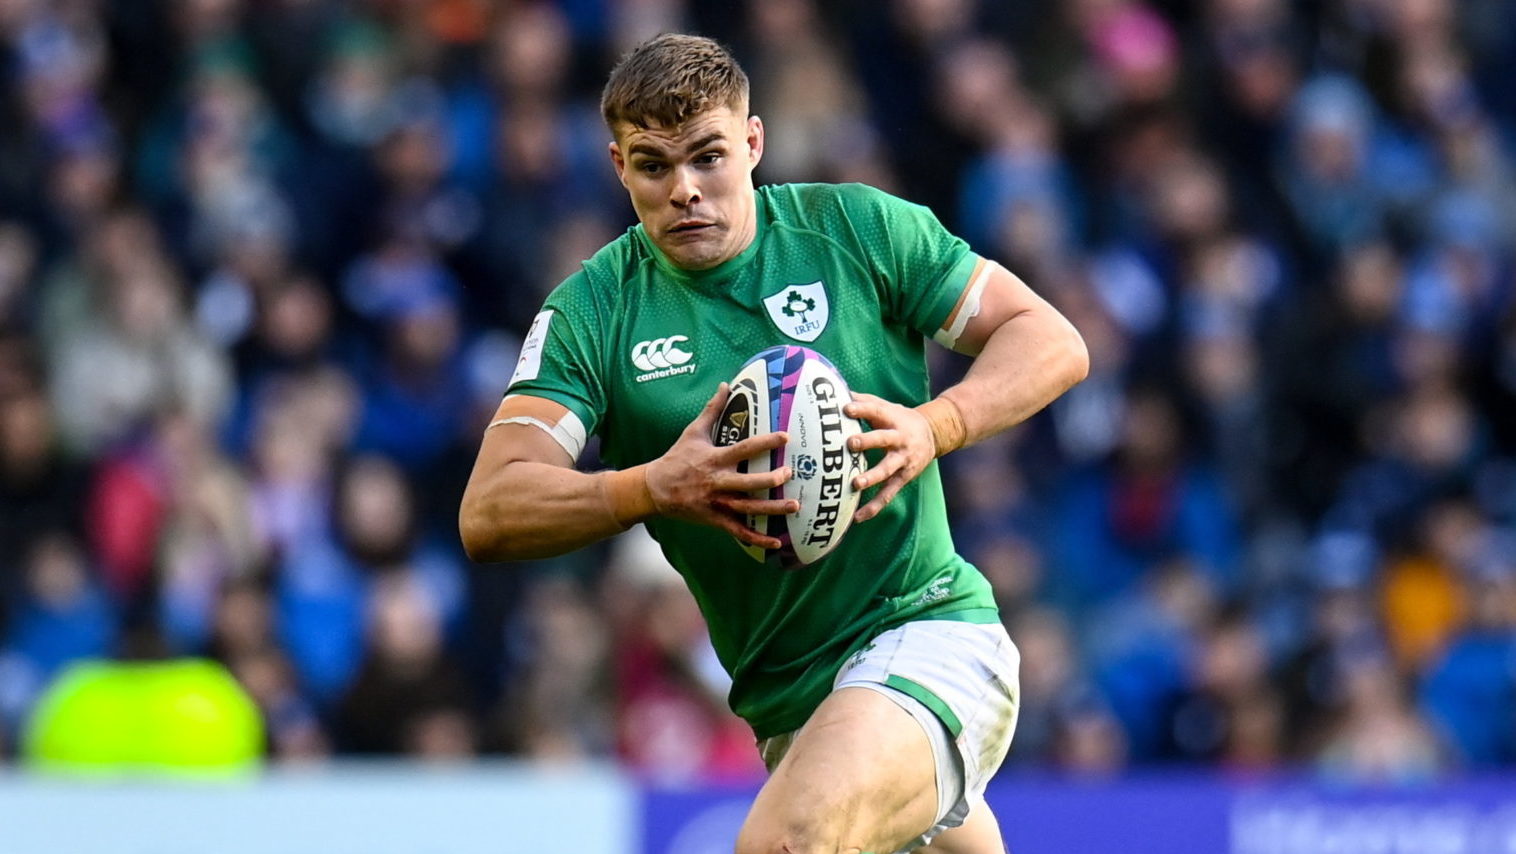 Andy Farrell will need to get his best players on the pitch for France, which means playing Garry Ringrose at 14, according to Brian O'Driscoll.